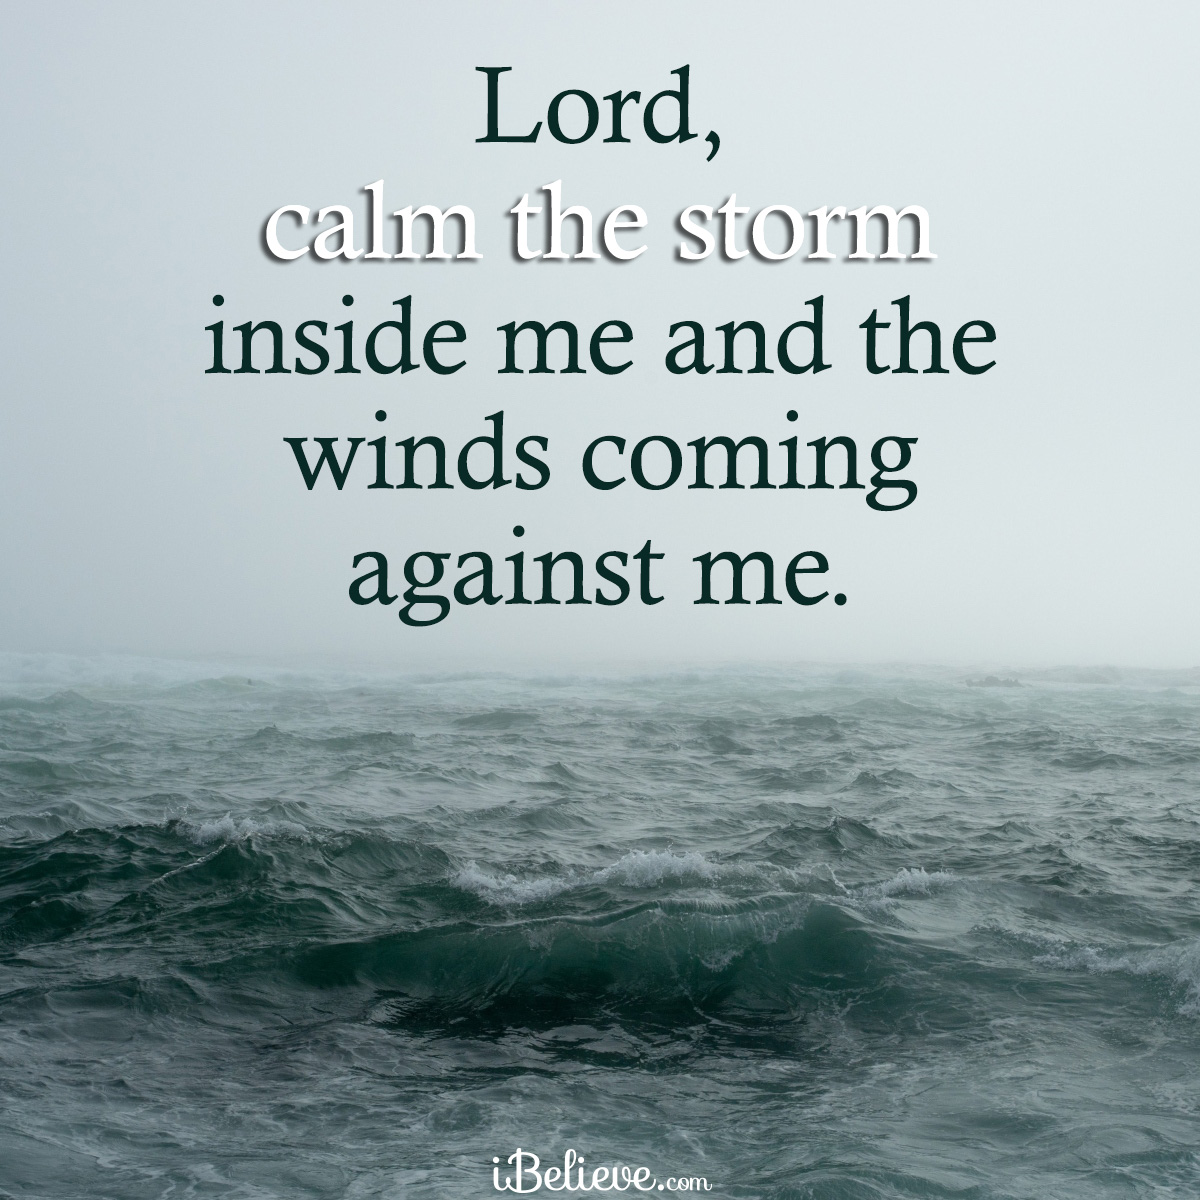 inspirational image about Jesus calming the storm in your life